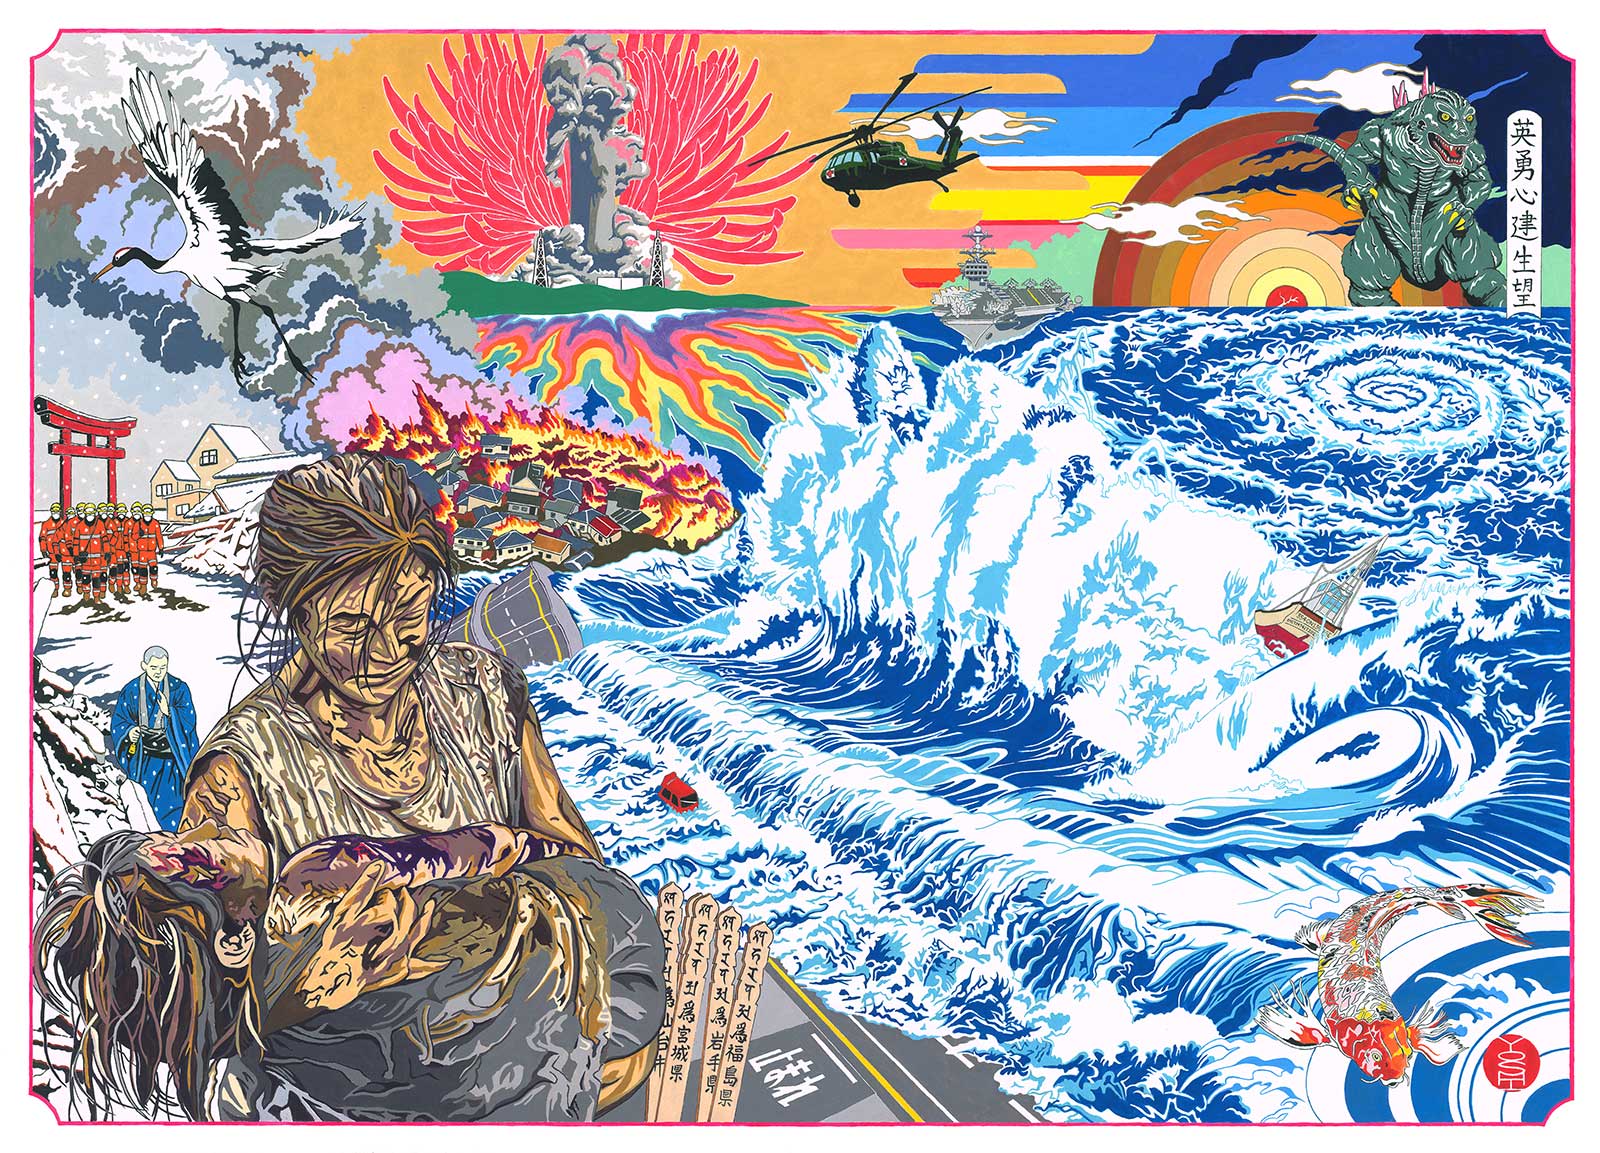 bright gouache painting depicting a crying Japanese woman holding a body against a background of a roiling sea, an exploding power plant, houses on fire, and godzilla.